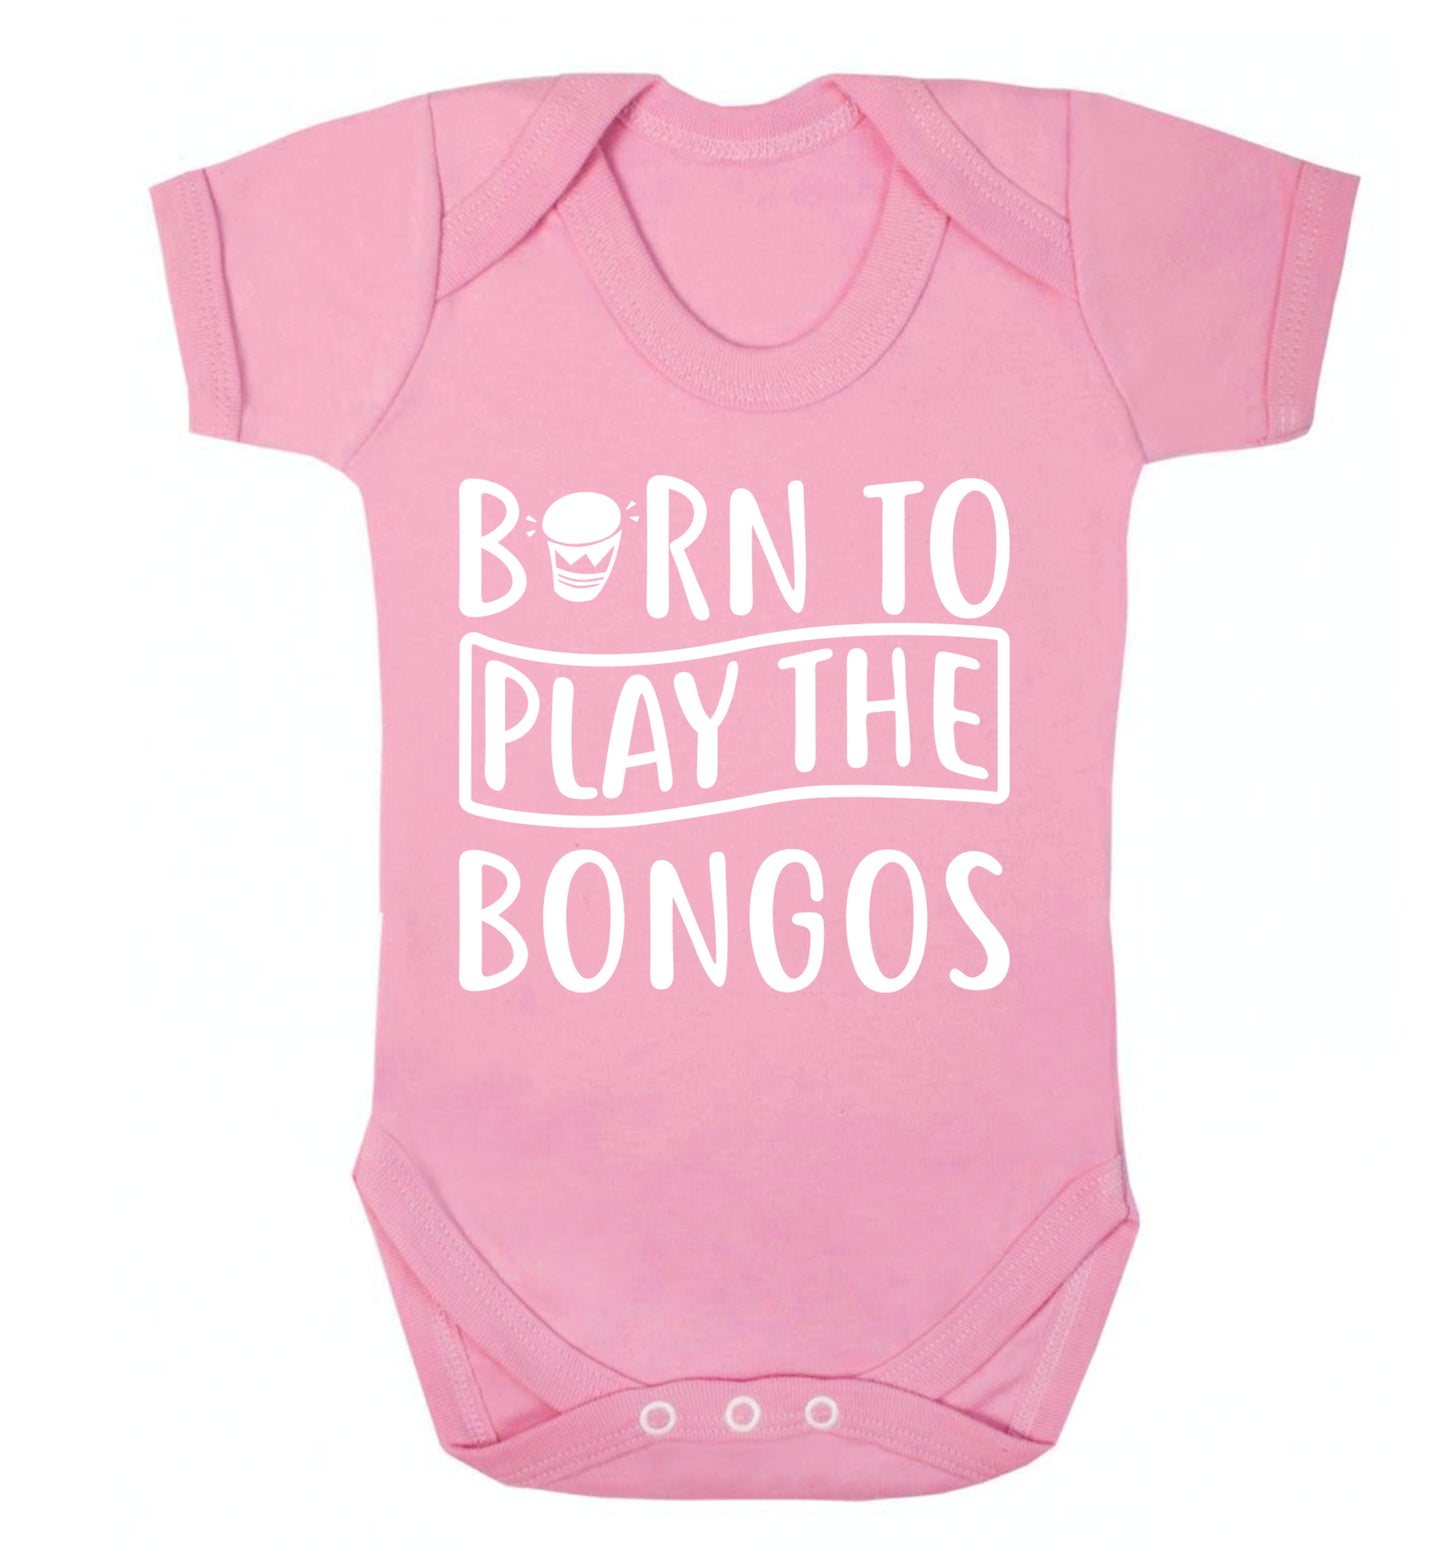 Born to play the bongos Baby Vest pale pink 18-24 months